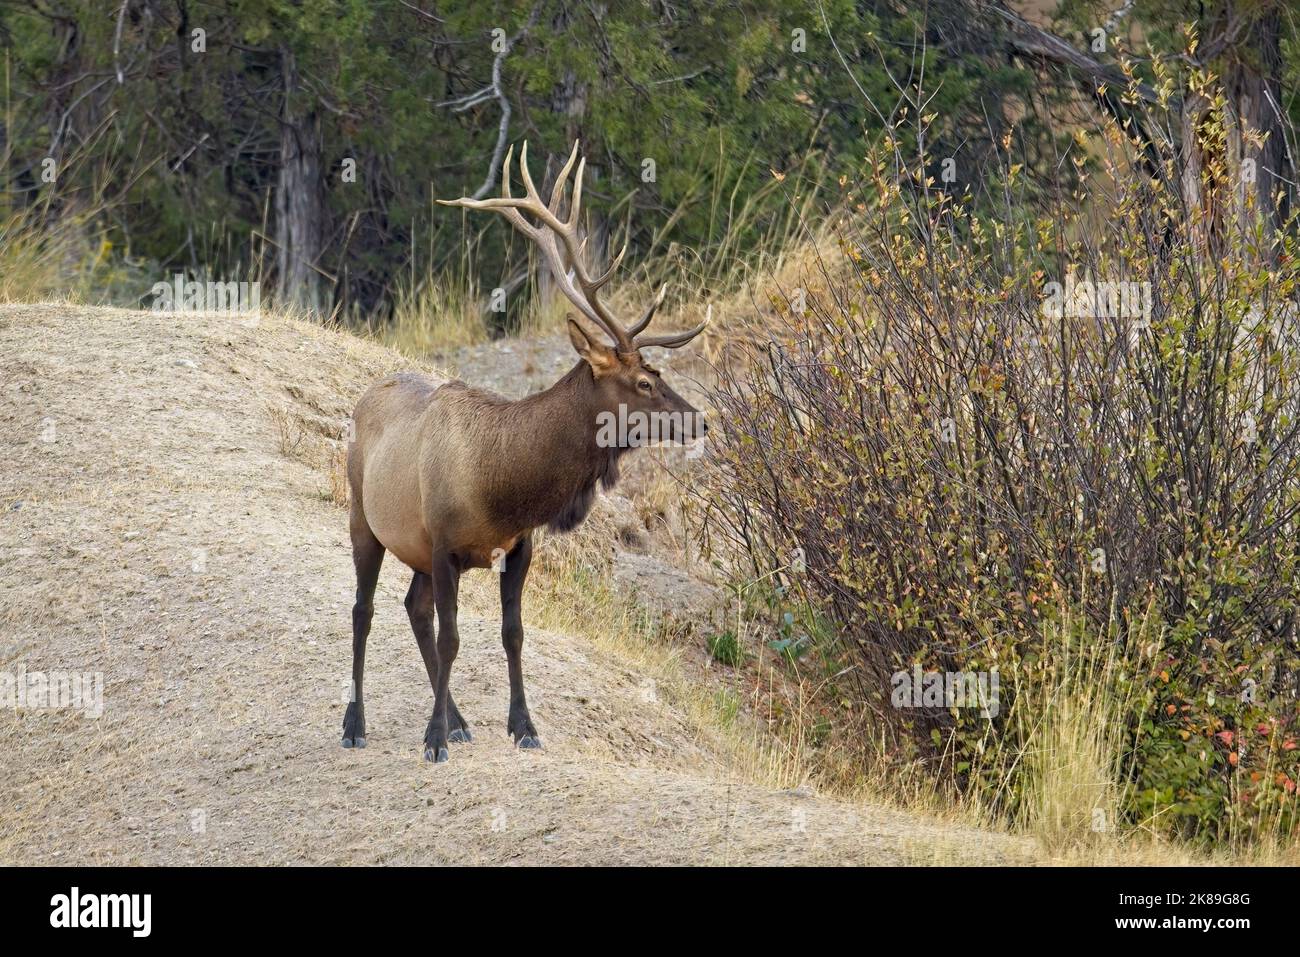 A big bull elk in an open area of a forest in western Montana. Stock Photo